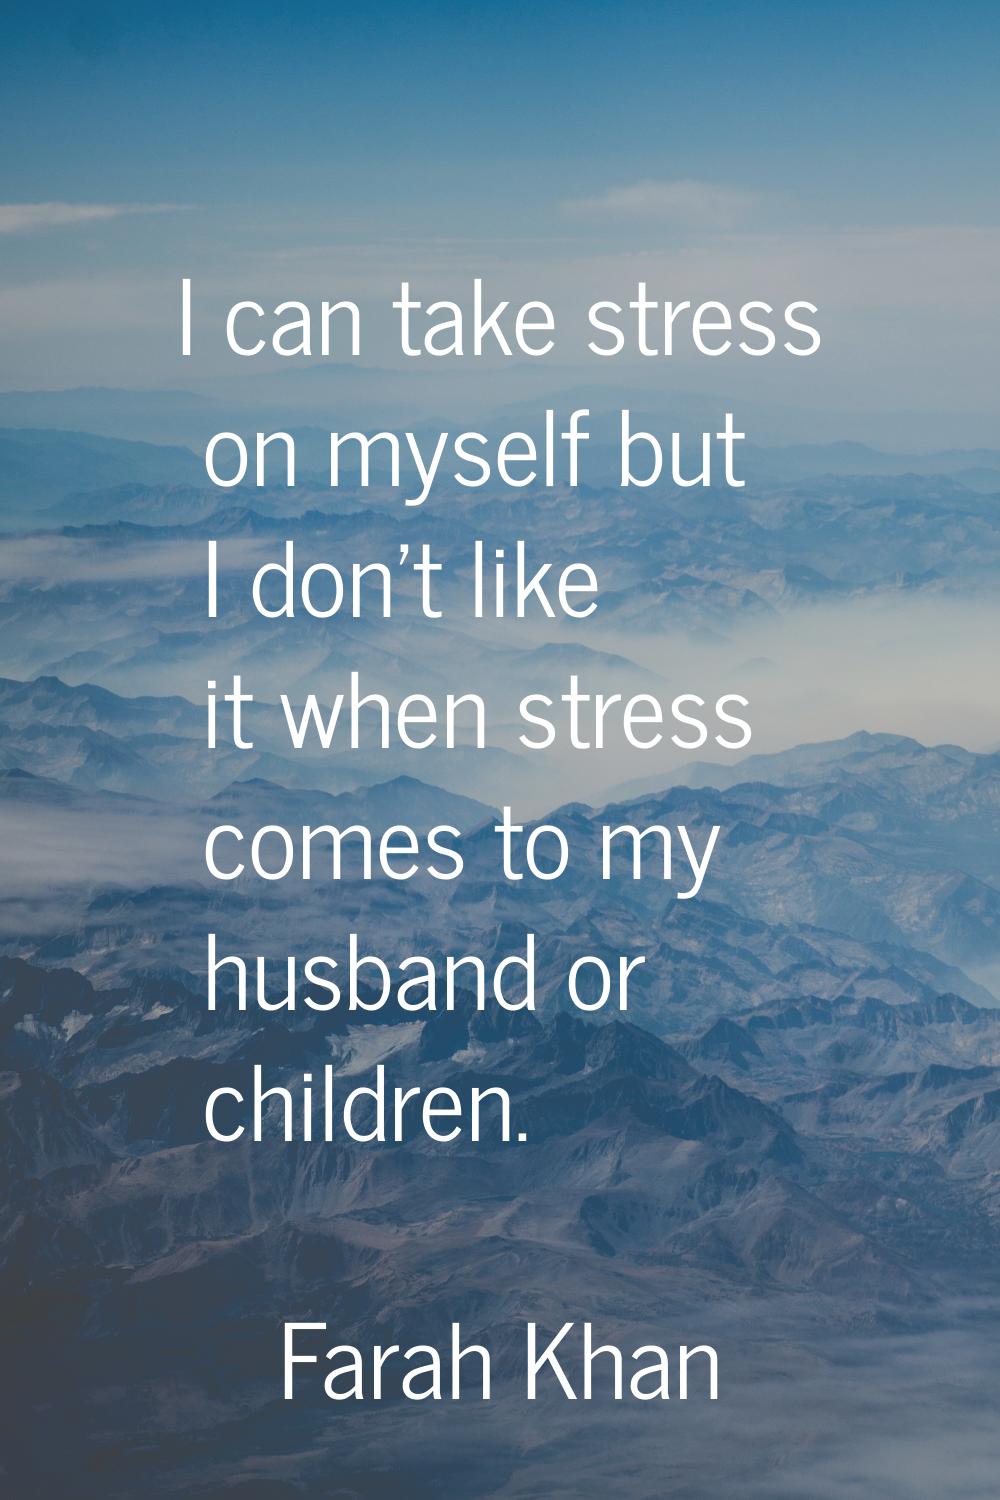 I can take stress on myself but I don't like it when stress comes to my husband or children.